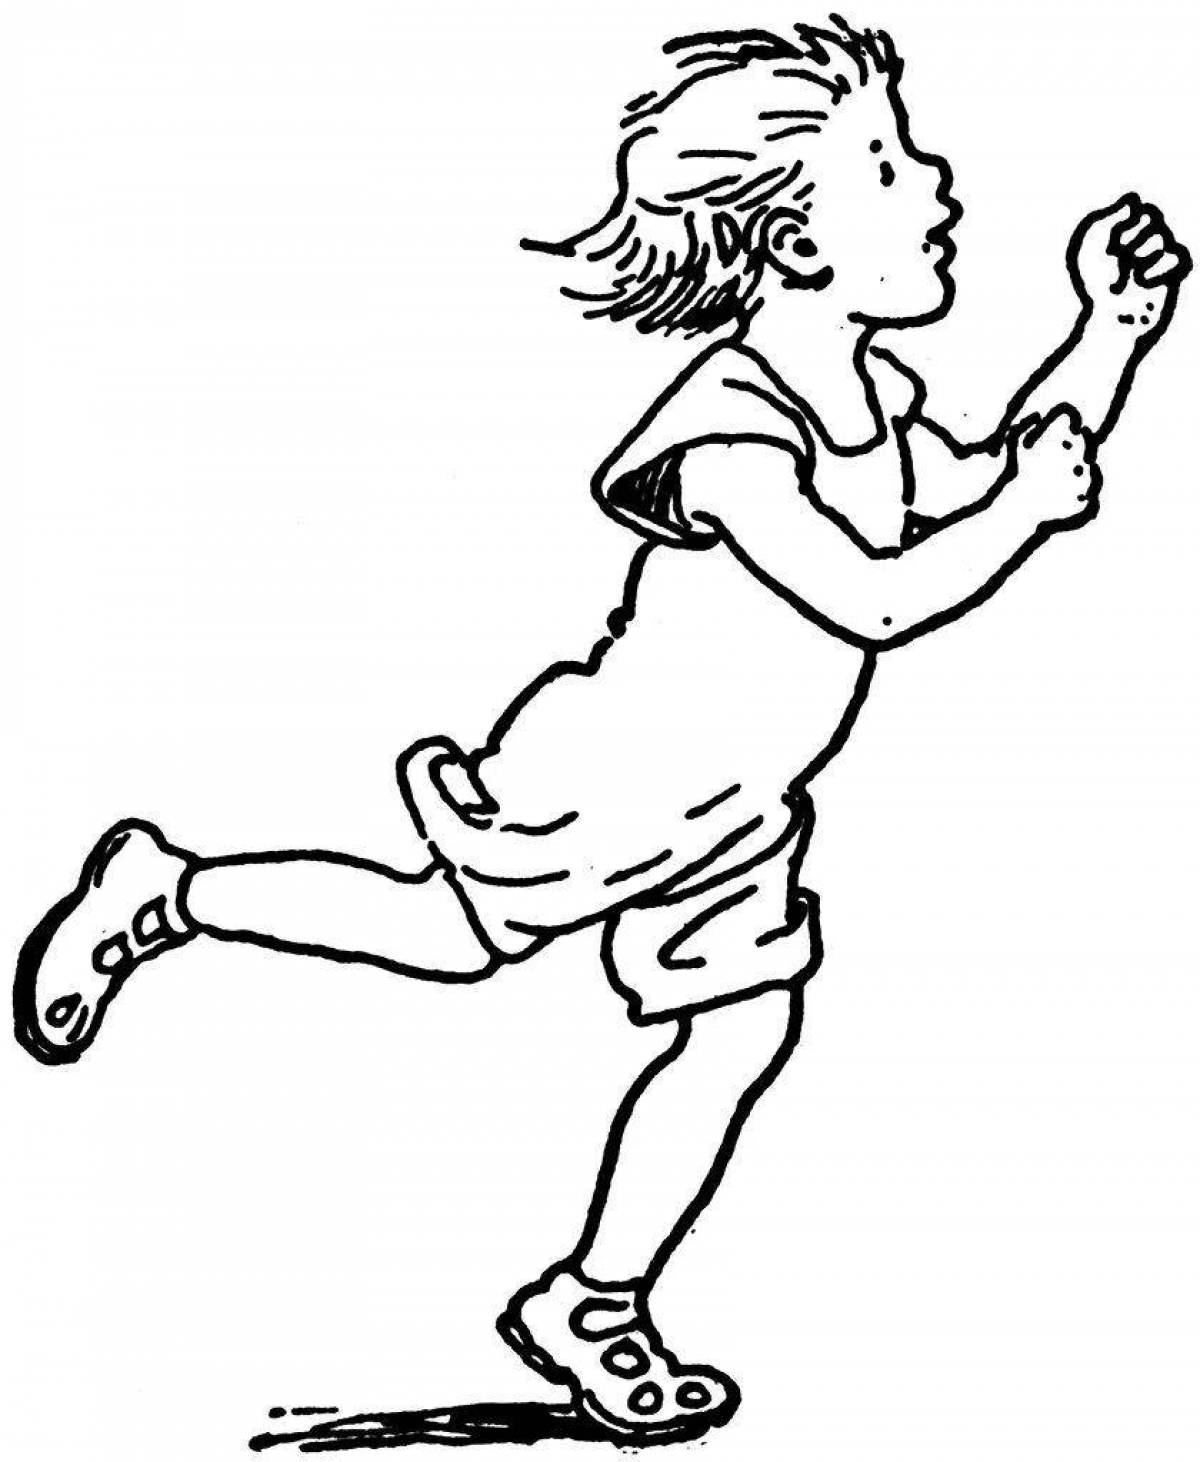 Coloring page living running boy